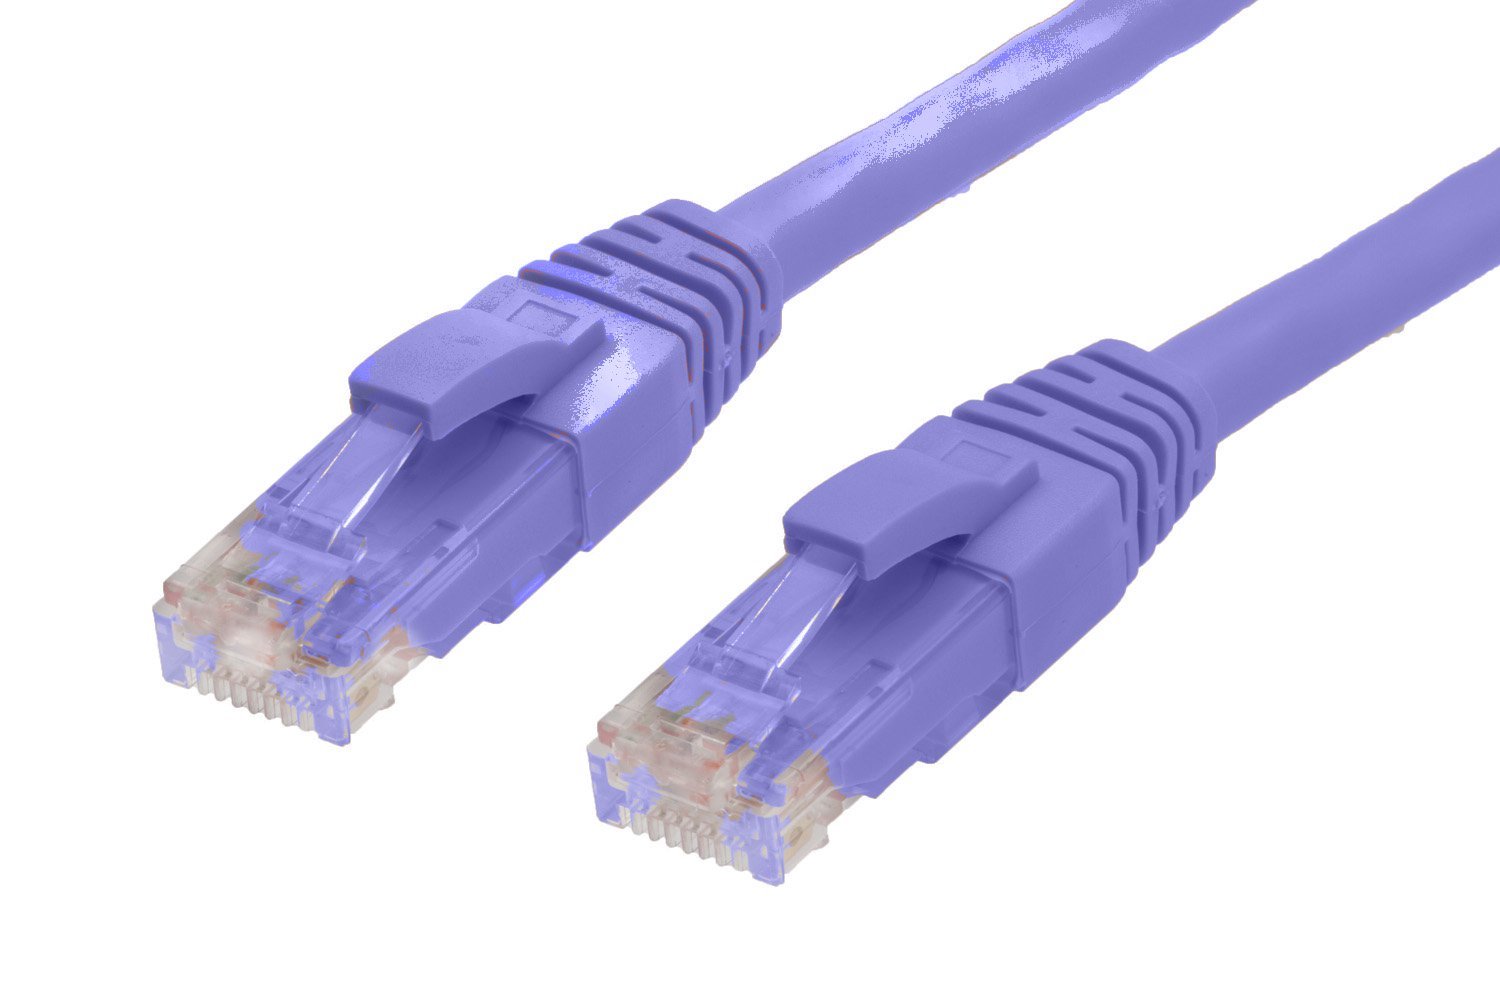 4Cabling 7M Cat 6 Ethernet Network Cable: Purple